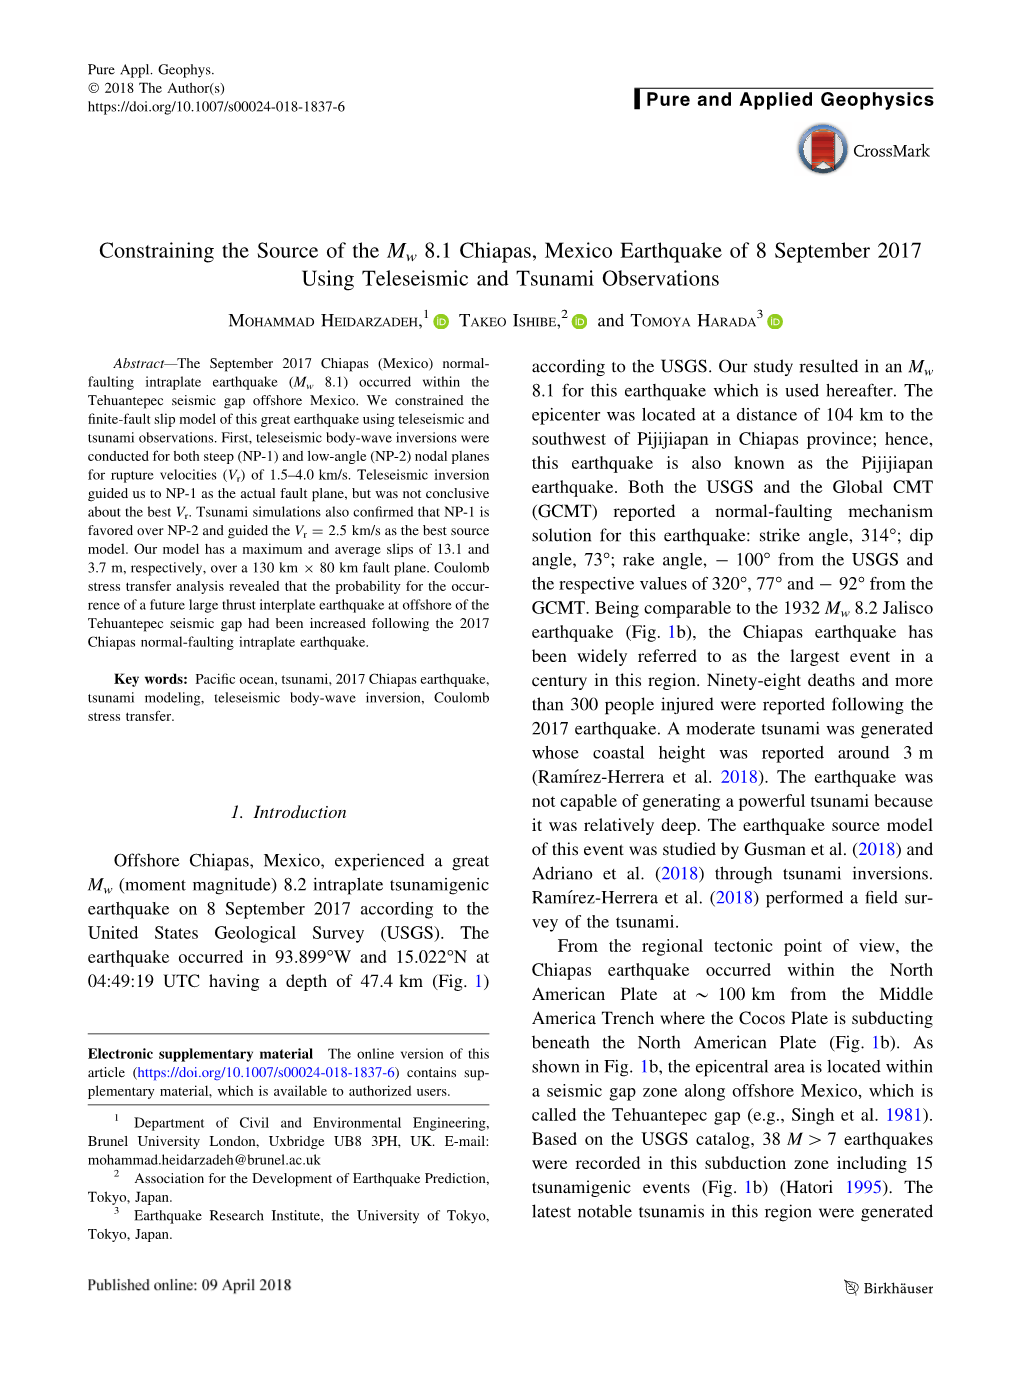 Constraining the Source of the Mw 8.1 Chiapas, Mexico Earthquake of 8 September 2017 Using Teleseismic and Tsunami Observations